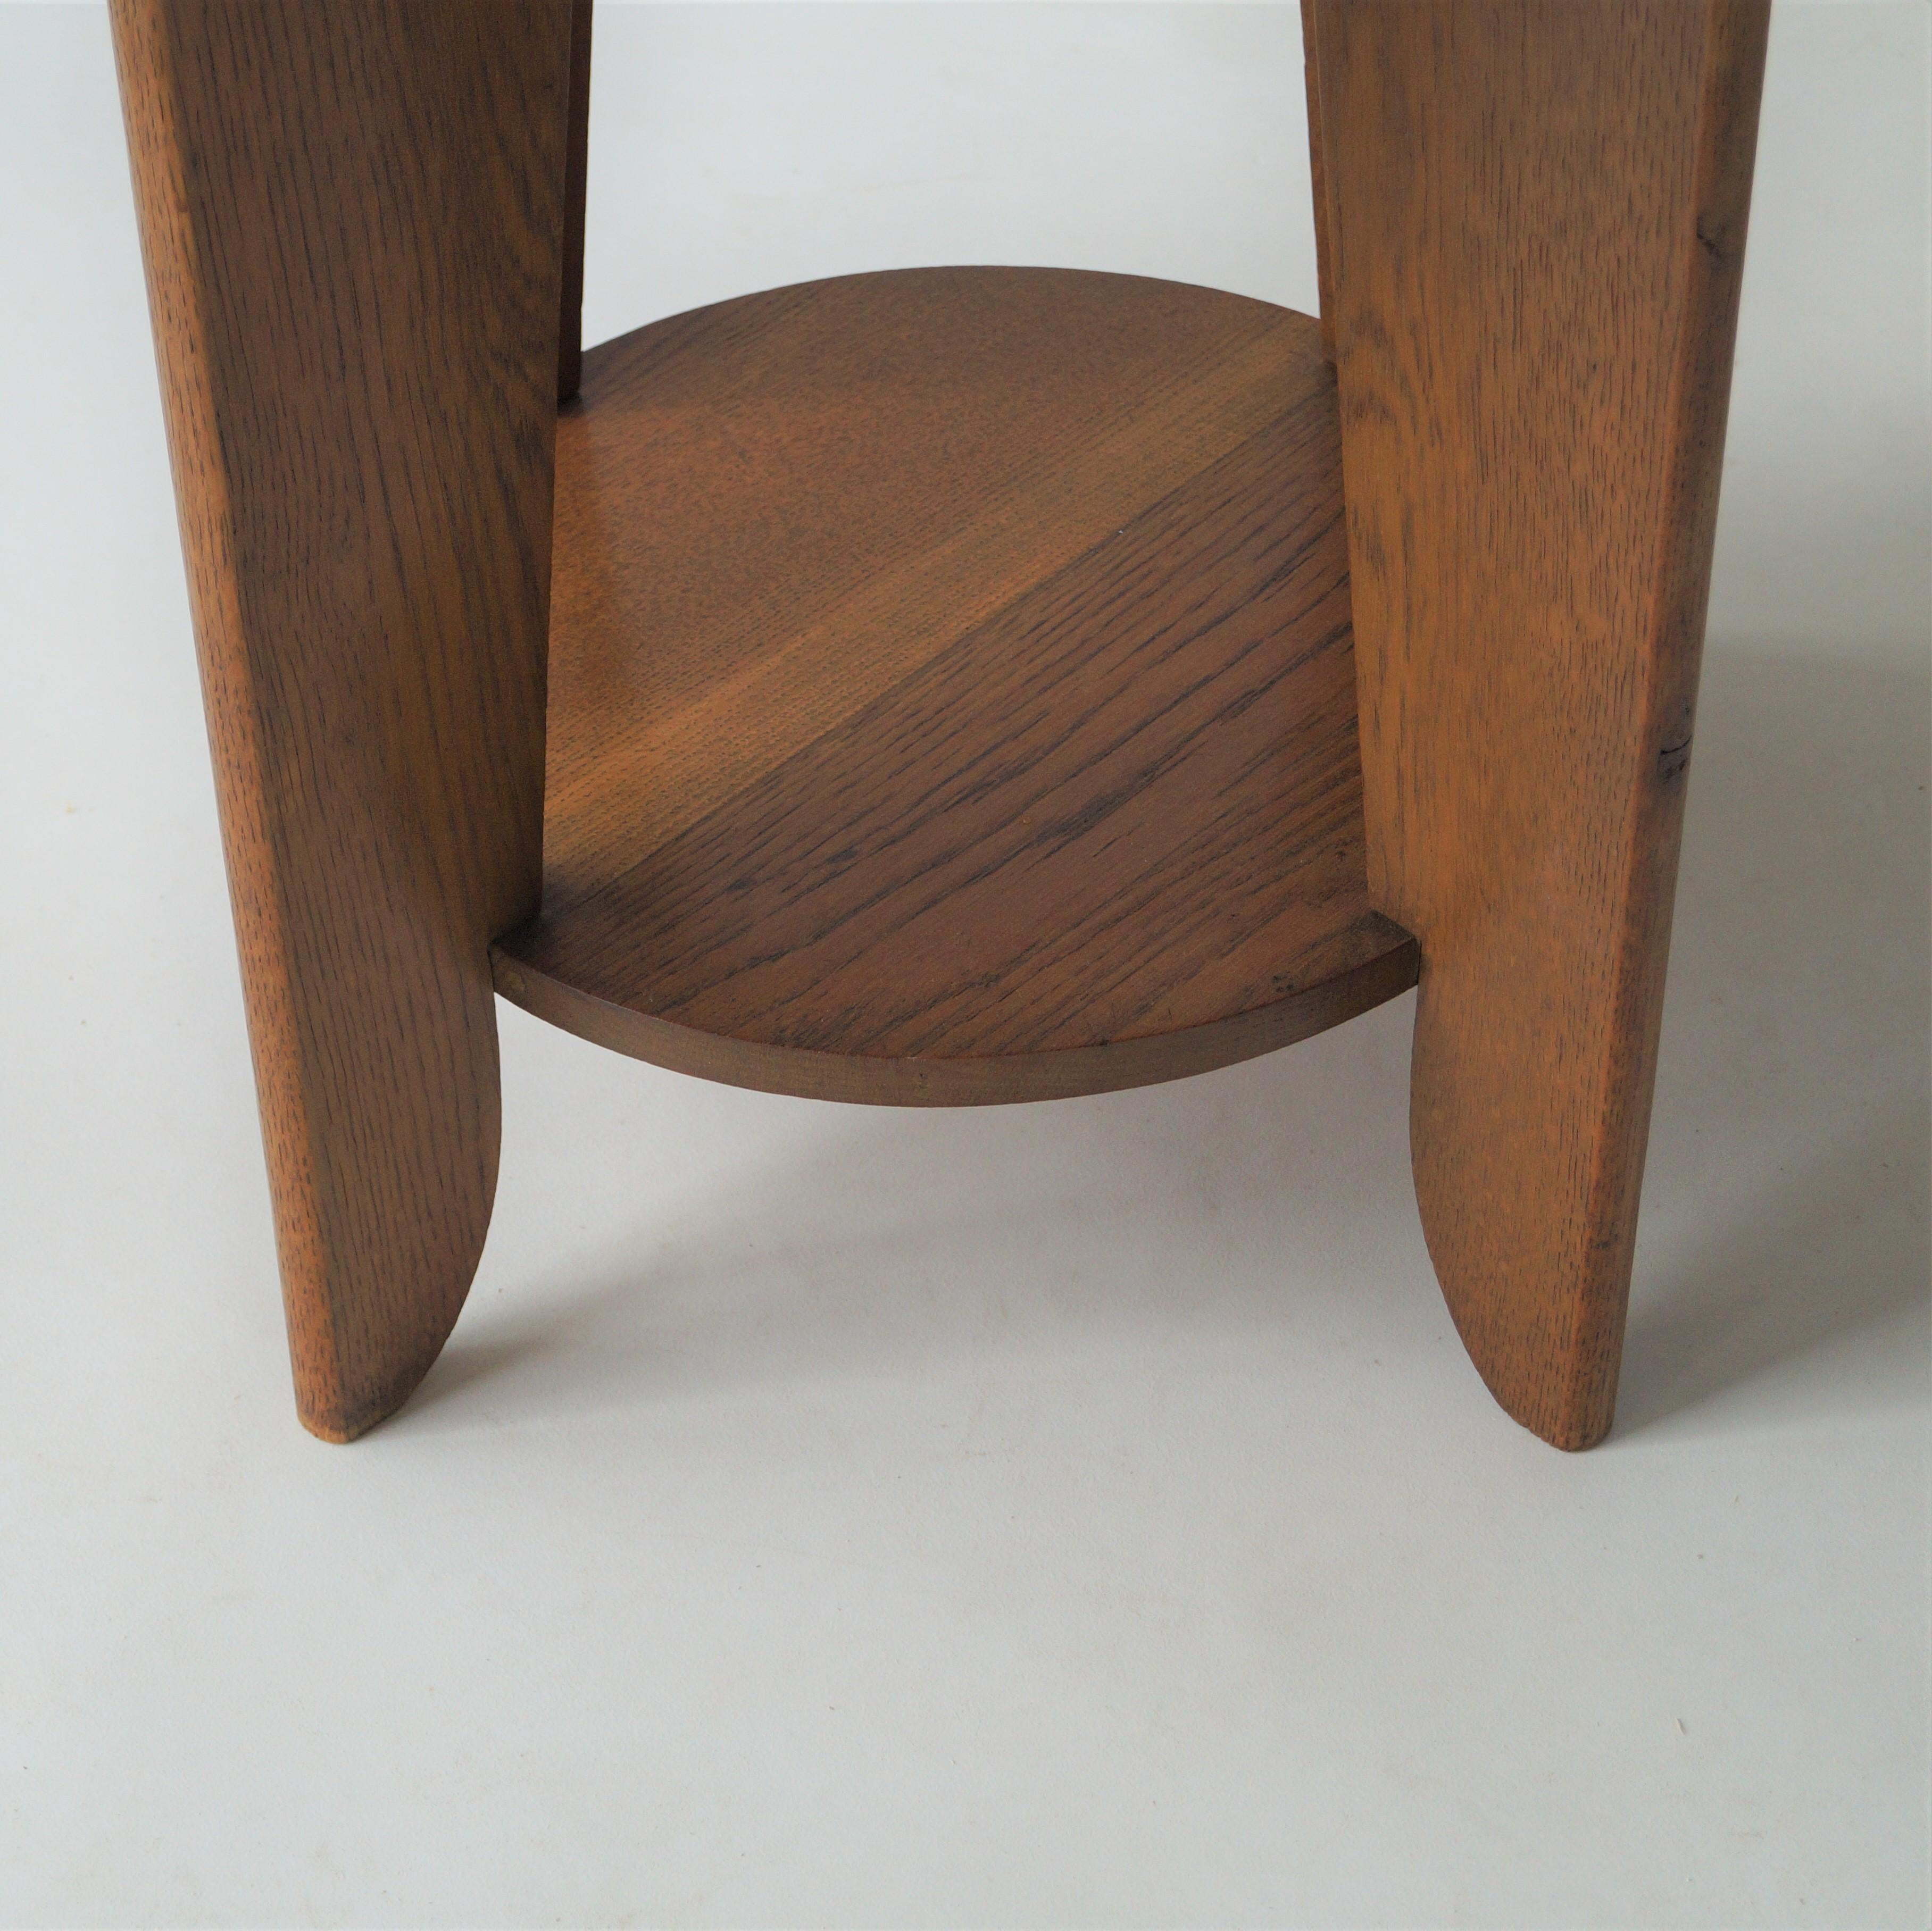 Dutch Art Deco Occasional Table Haagse School, 1930s For Sale 5